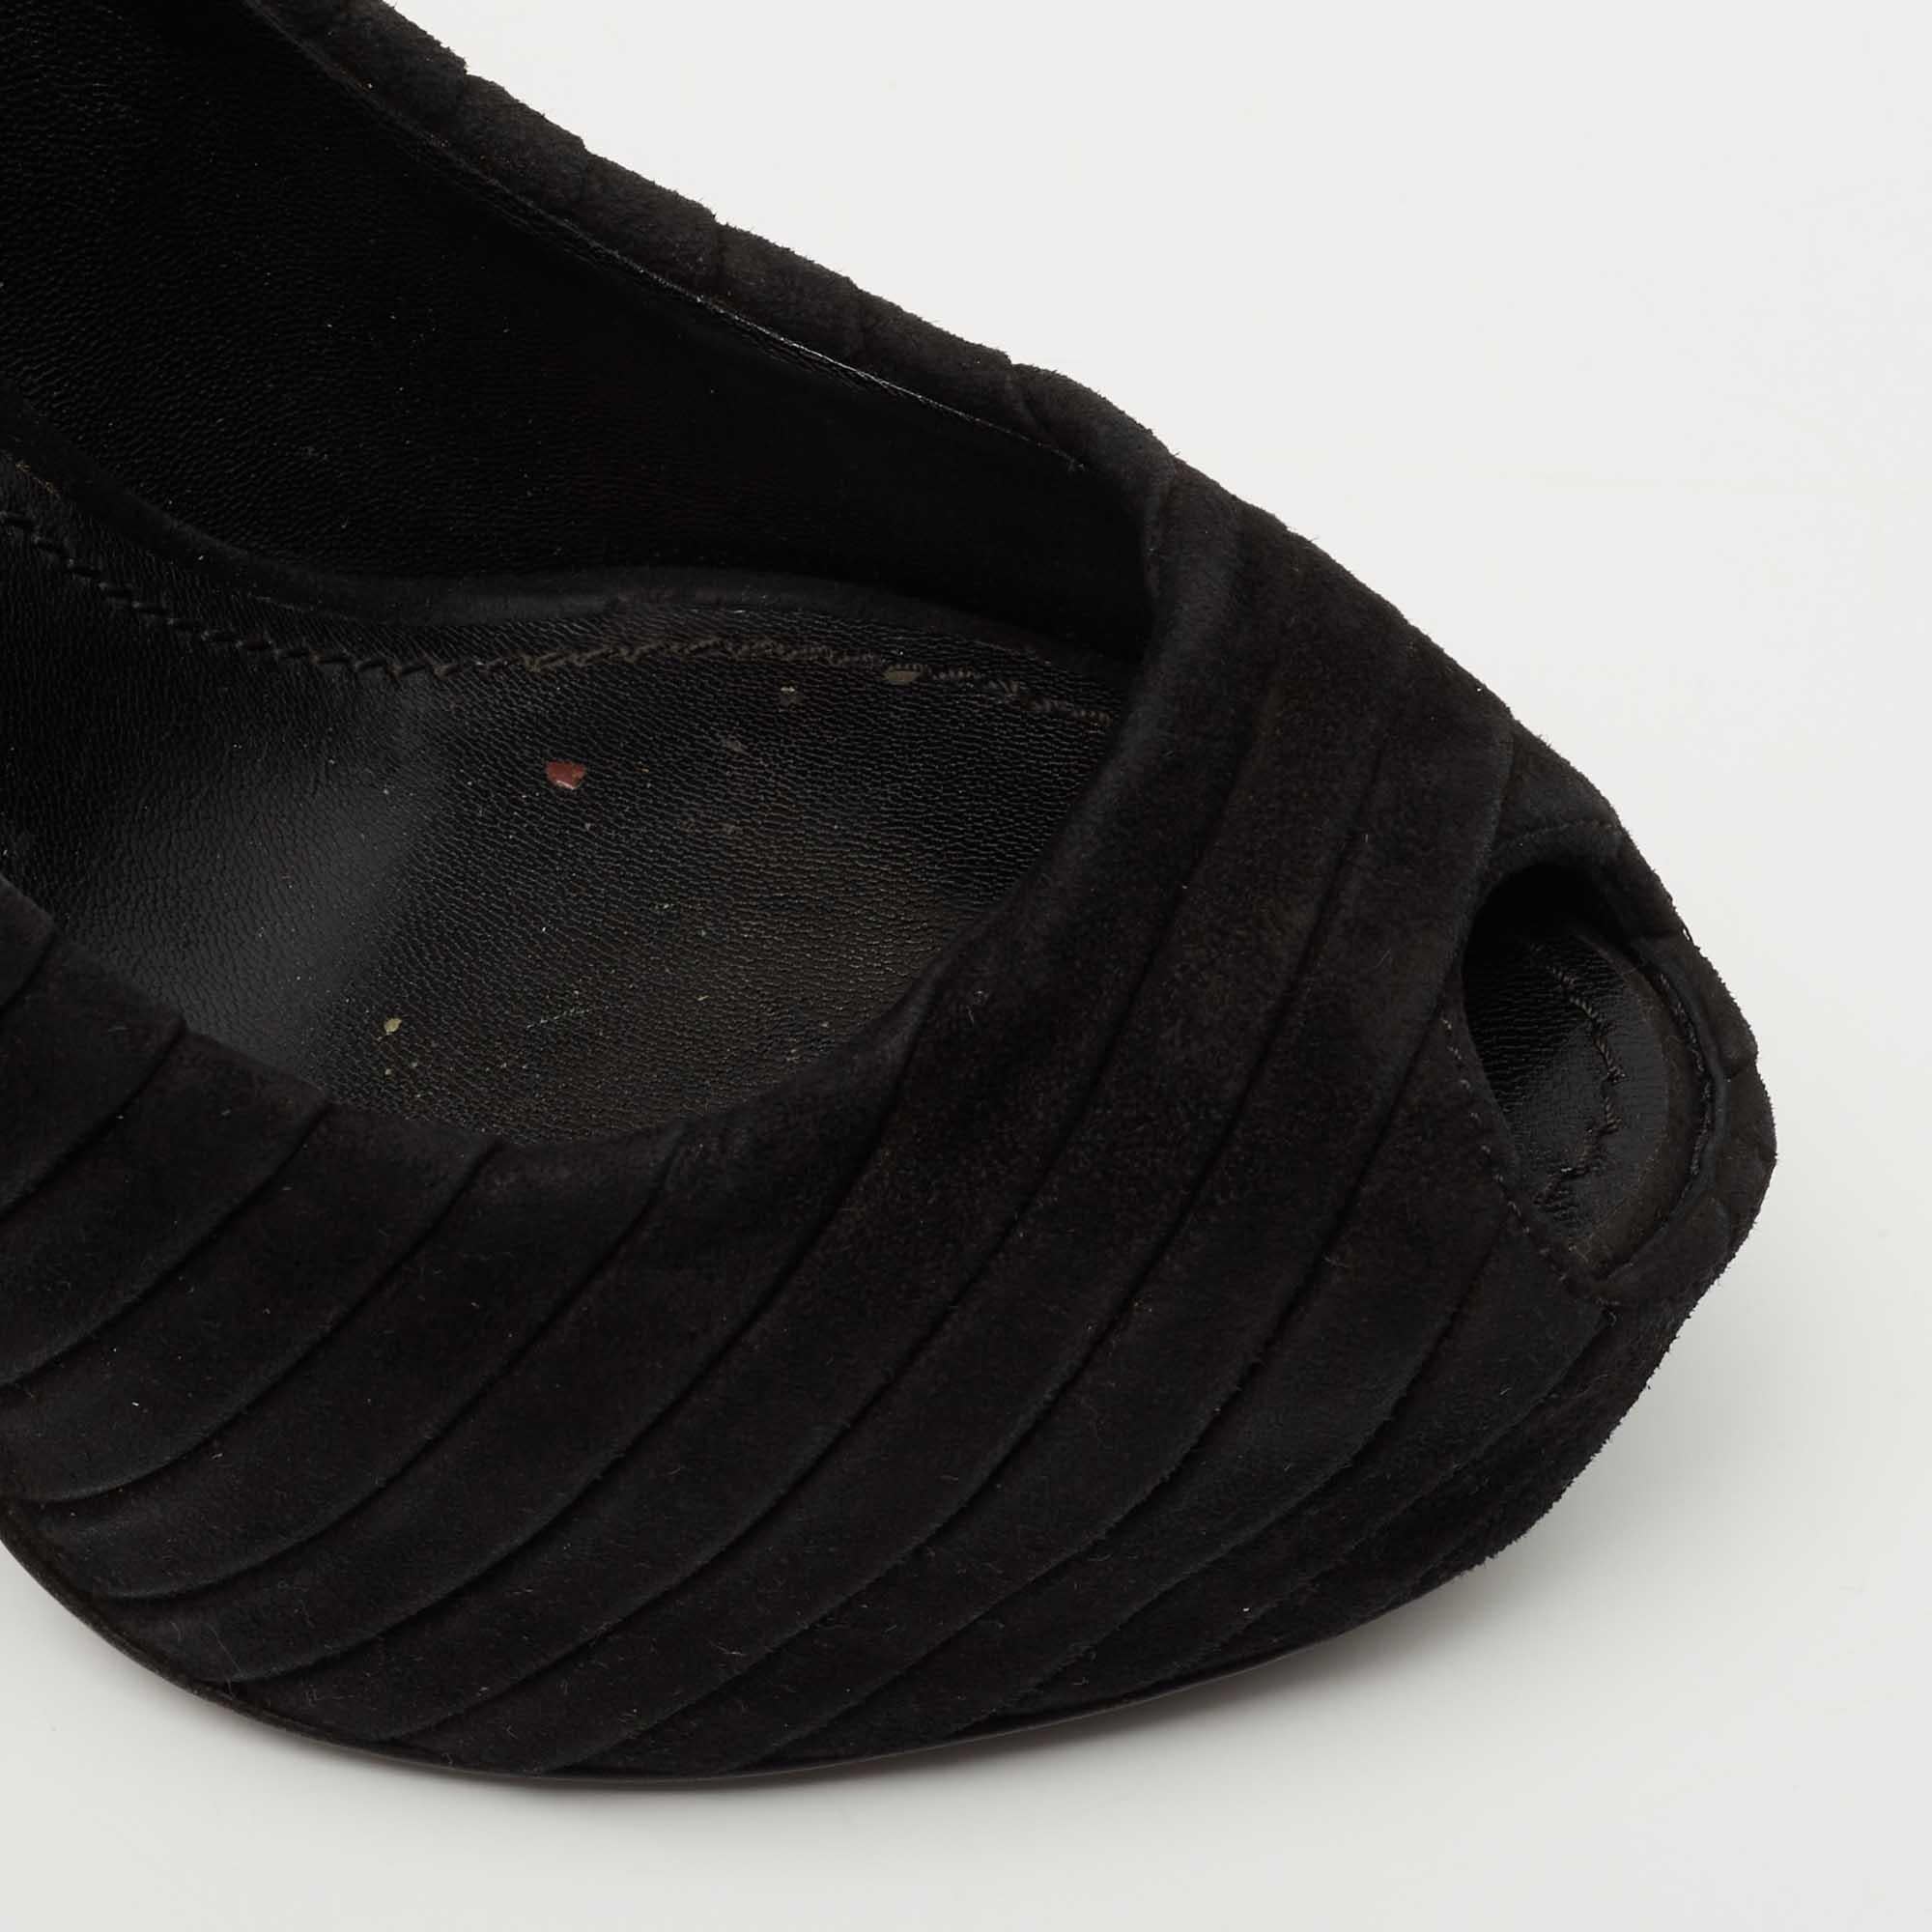 Louis Vuitton Black Pleated Suede Oh Really! Peep Toe Pumps Size 36.5 1